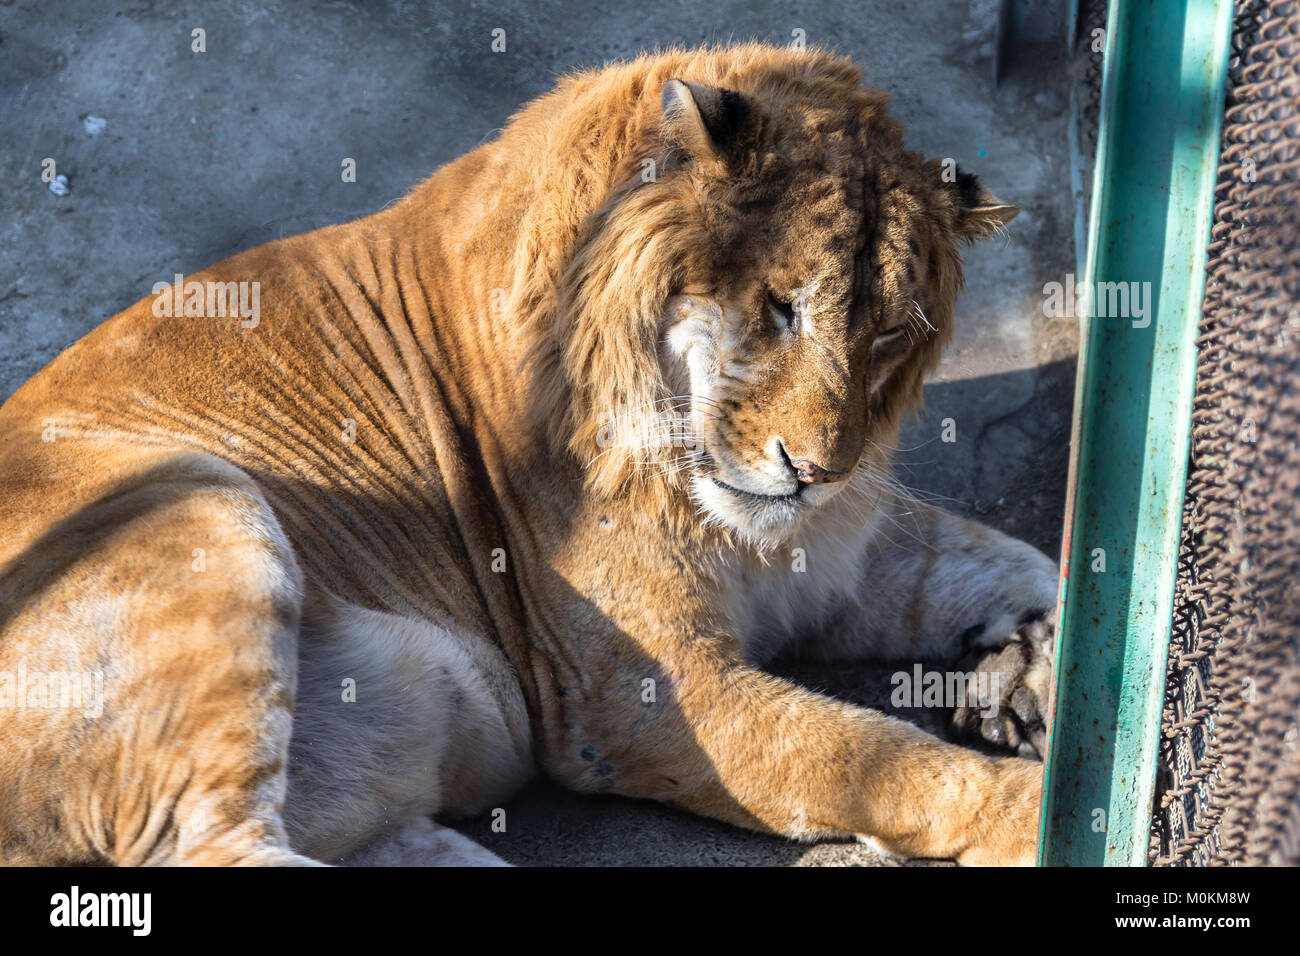 A Liger in the Siberian Tiger Park, Harbin, China. The Liger is the hybrid  of a